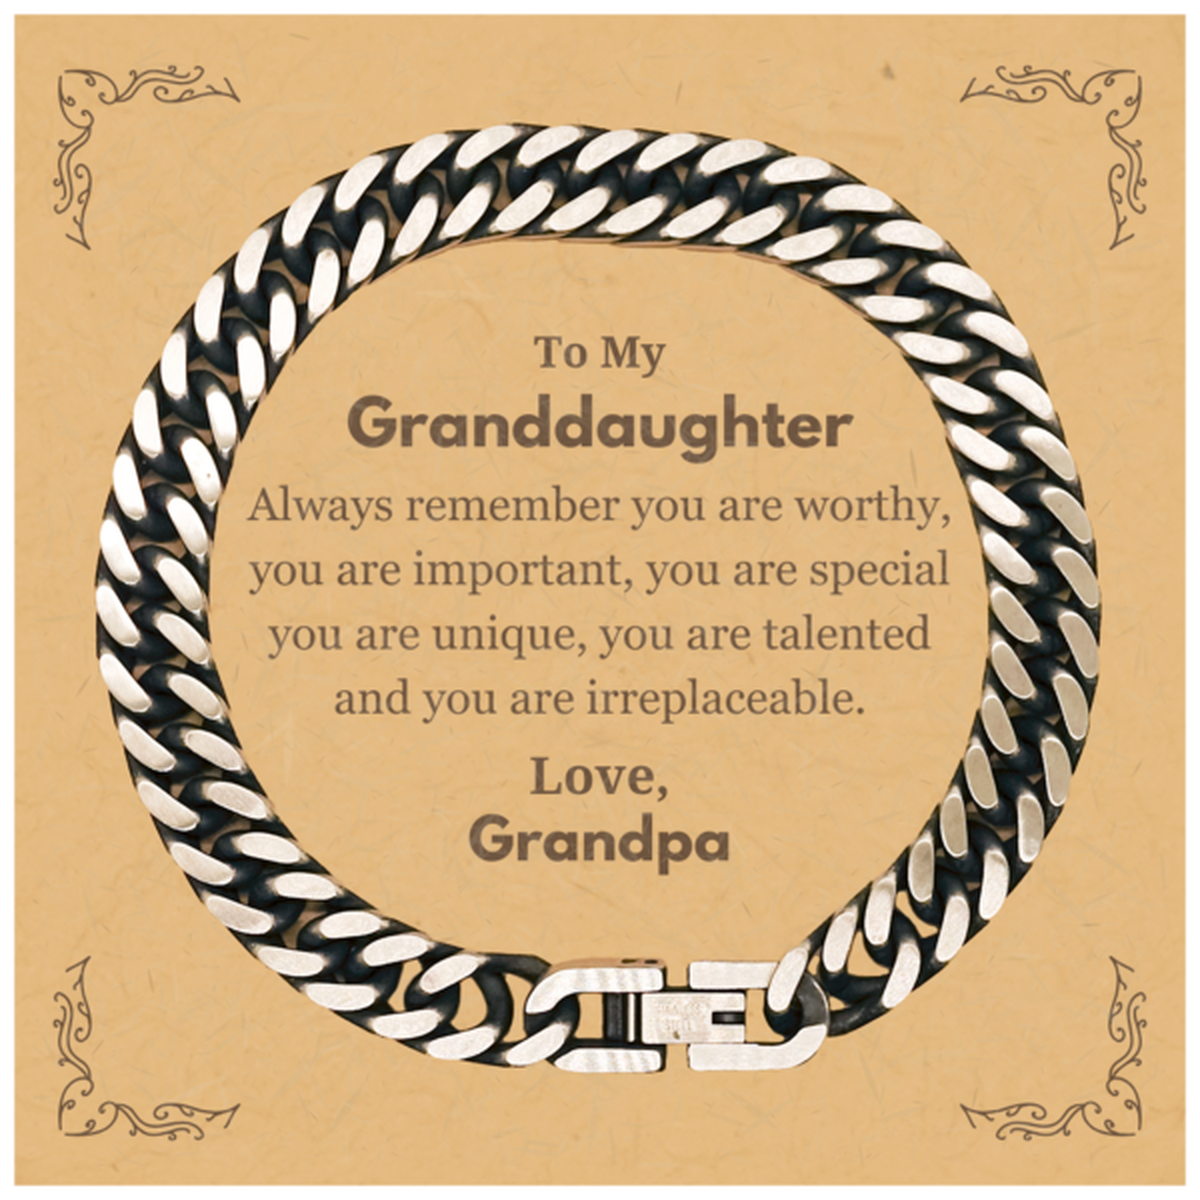 Granddaughter Birthday Gifts from Grandpa, Inspirational Cuban Link Chain Bracelet for Granddaughter Christmas Graduation Gifts for Granddaughter Always remember you are worthy, you are important. Love, Grandpa